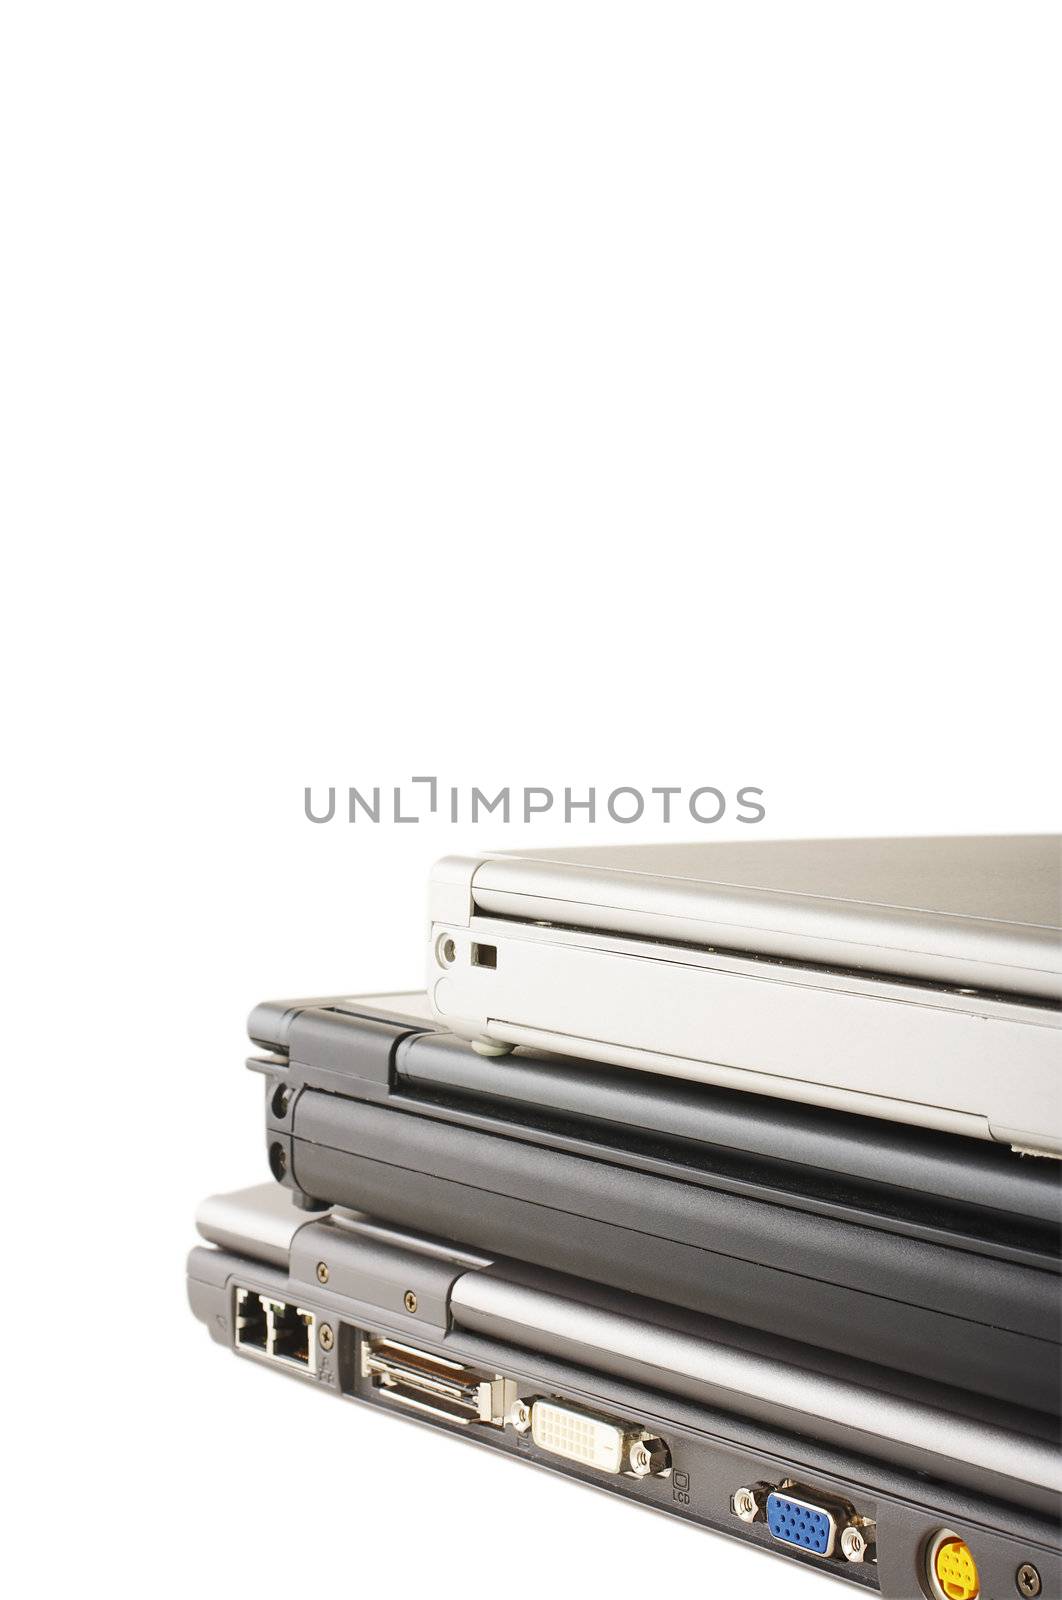 Stacked laptops by mjp